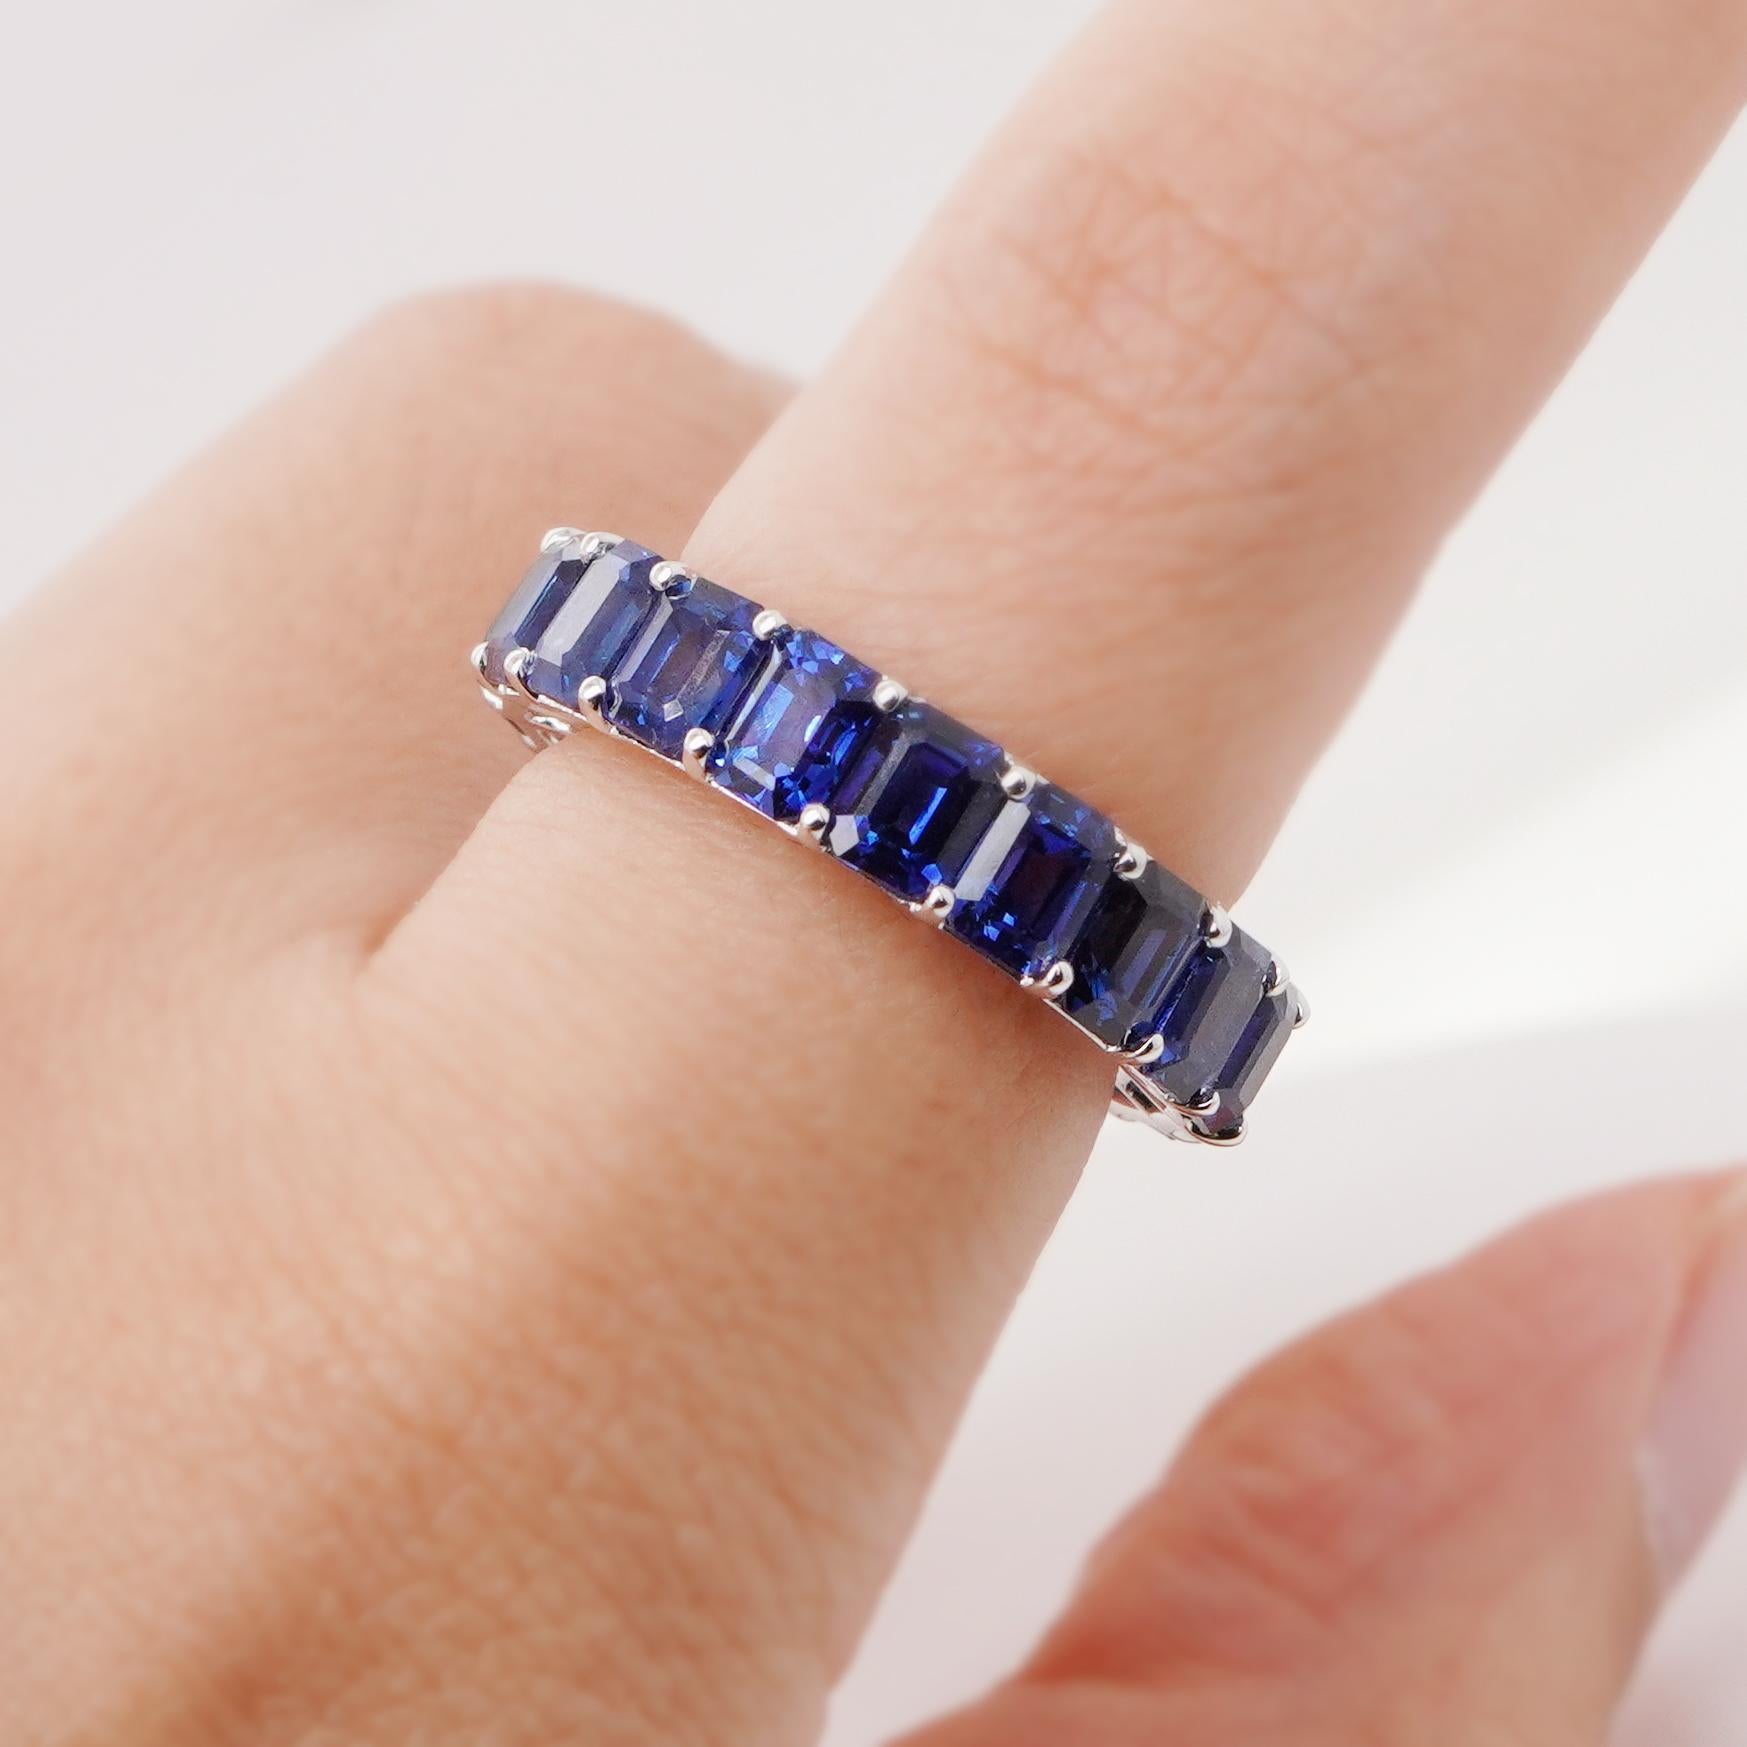 18K white gold with natural blue sapphire 8.94 carat 4.72 grams